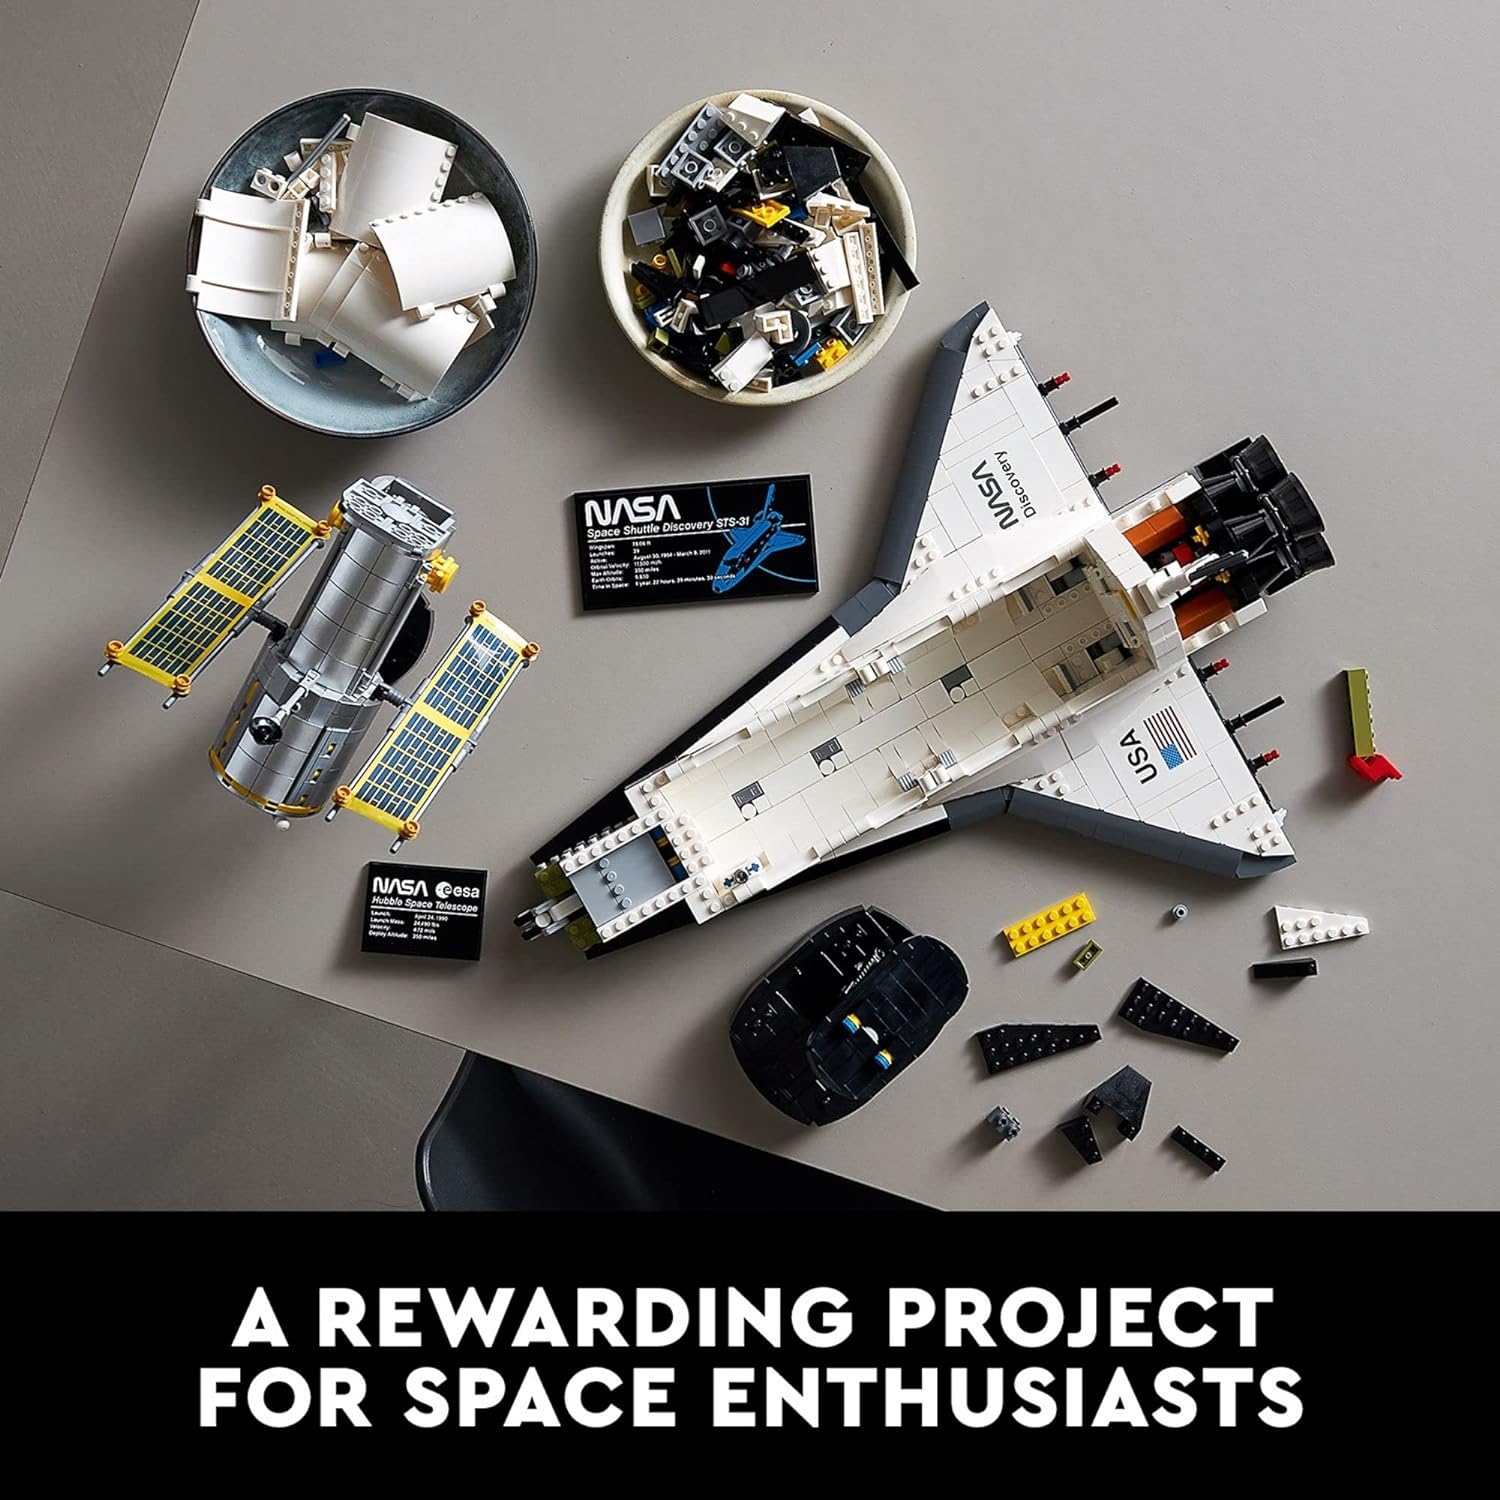 LEGO Icons NASA Space Shuttle Discovery 10283 Model Building Set - Spaceship Collection with Hubble Telescope, Detailed Display for Home or Office Decor